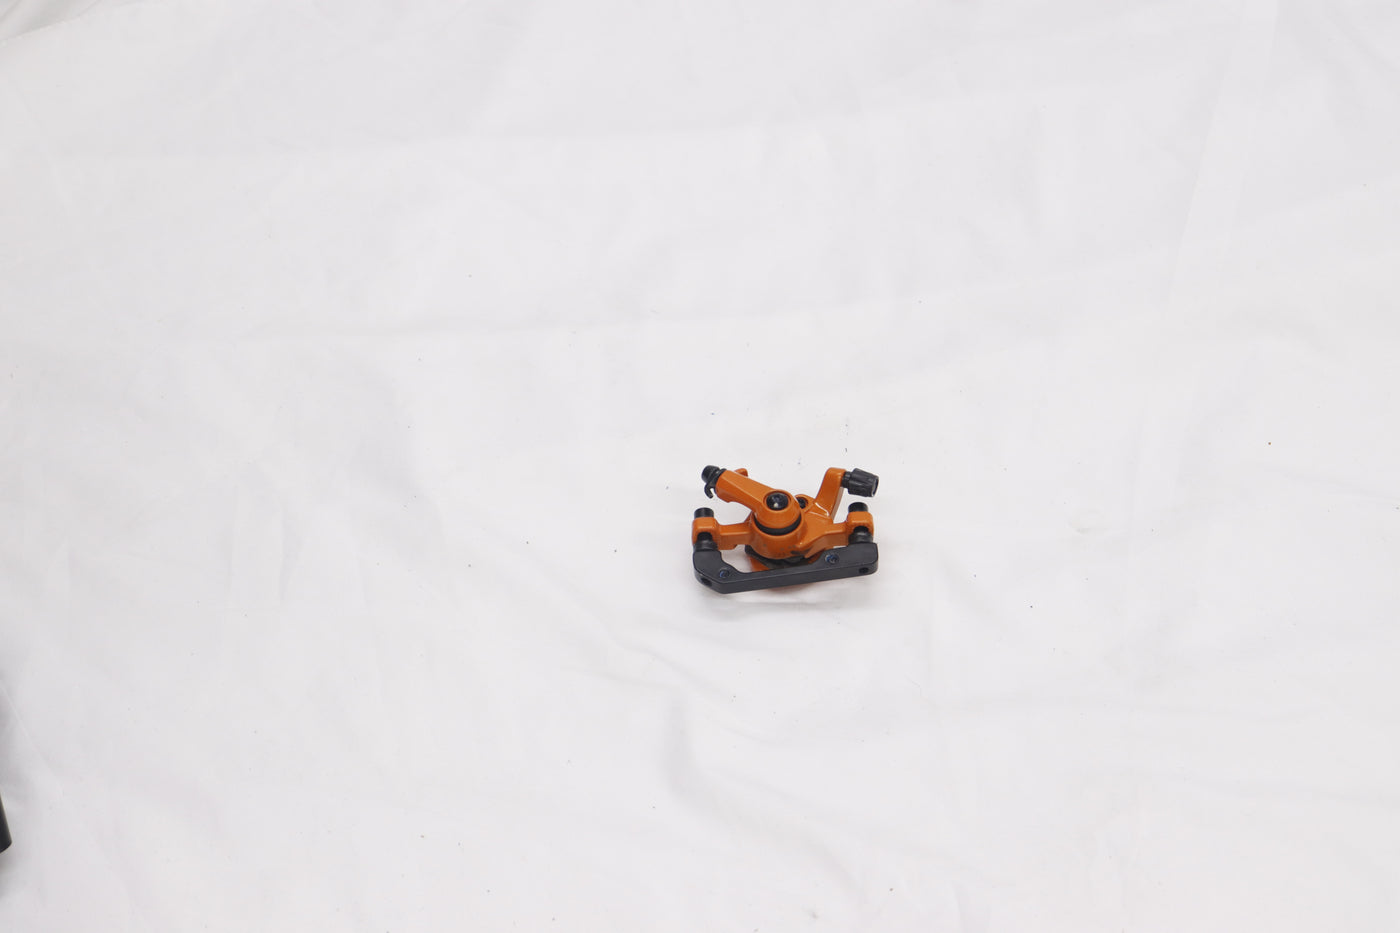 Spare Parts for KUKIRIN G4 Electric Scooter